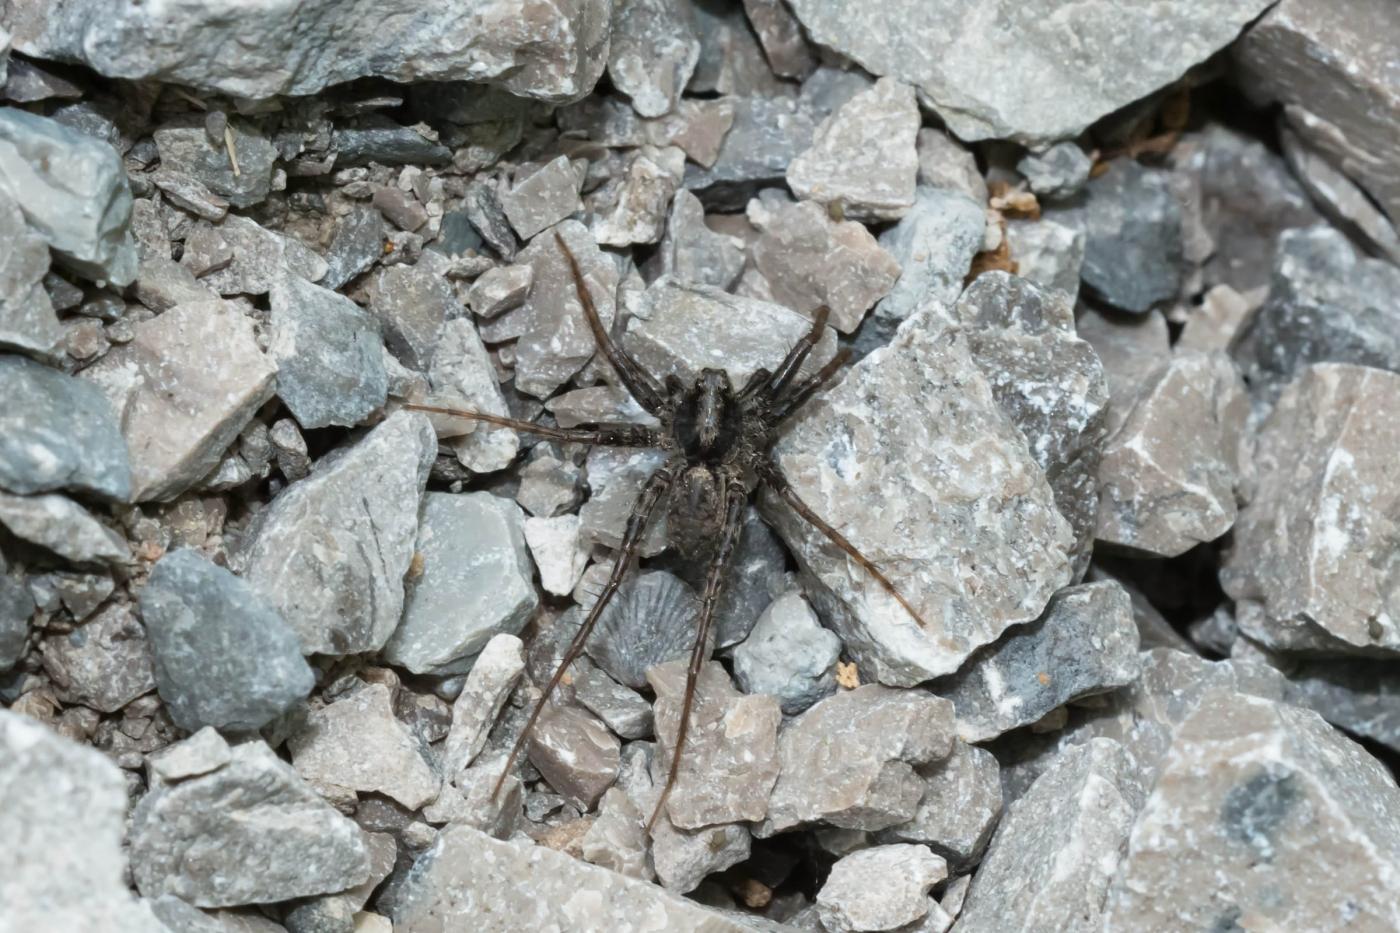 A Thin-legged Wolf Spider is resting on a gravel path. Photo by Paul Reeves Photography